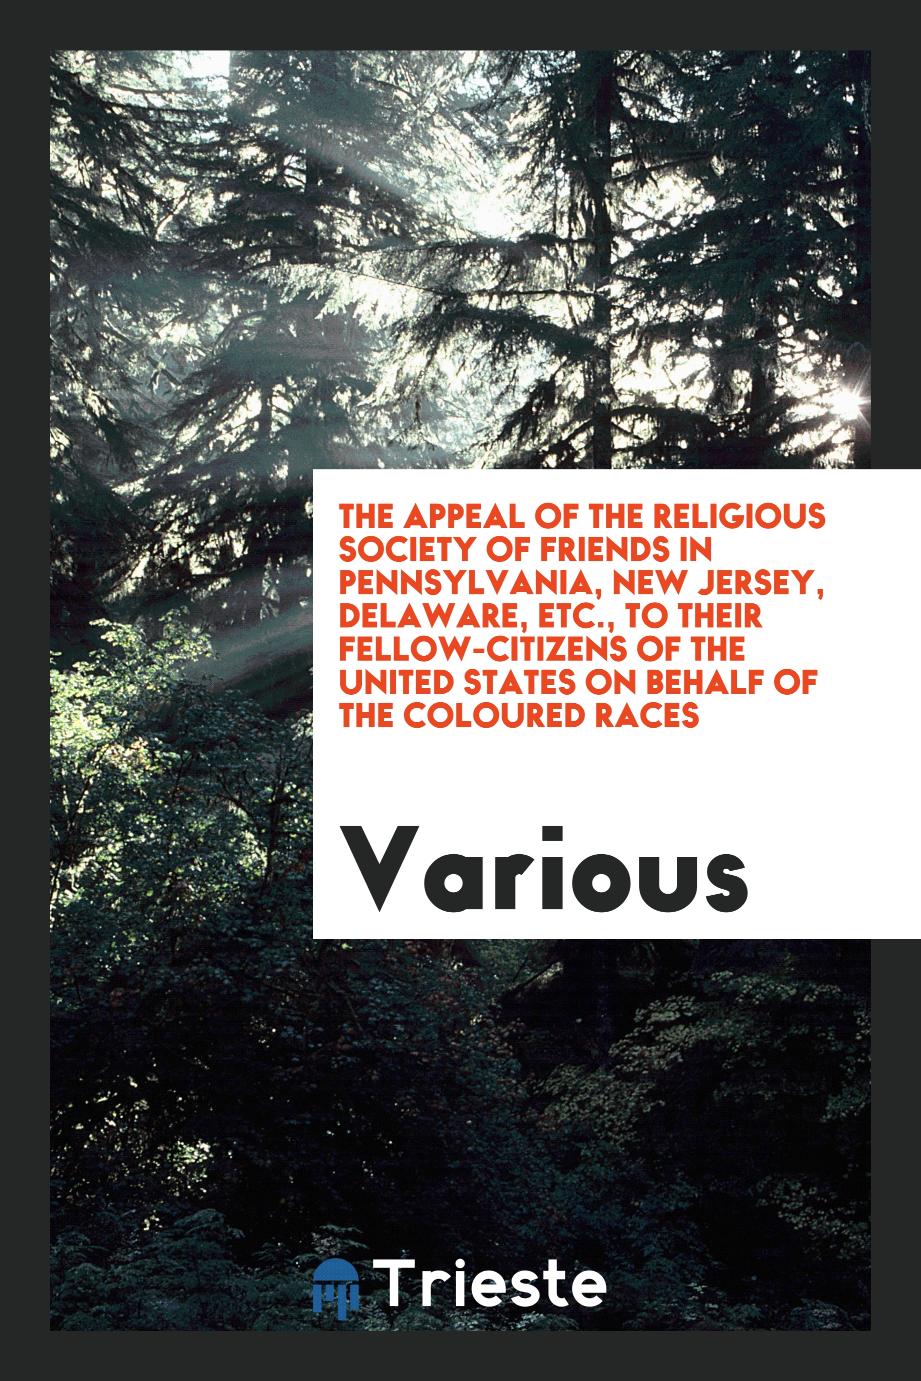 The Appeal of the Religious Society of Friends in Pennsylvania, New Jersey, Delaware, Etc., To their fellow-citizens of the United States on behalf of the coloured races